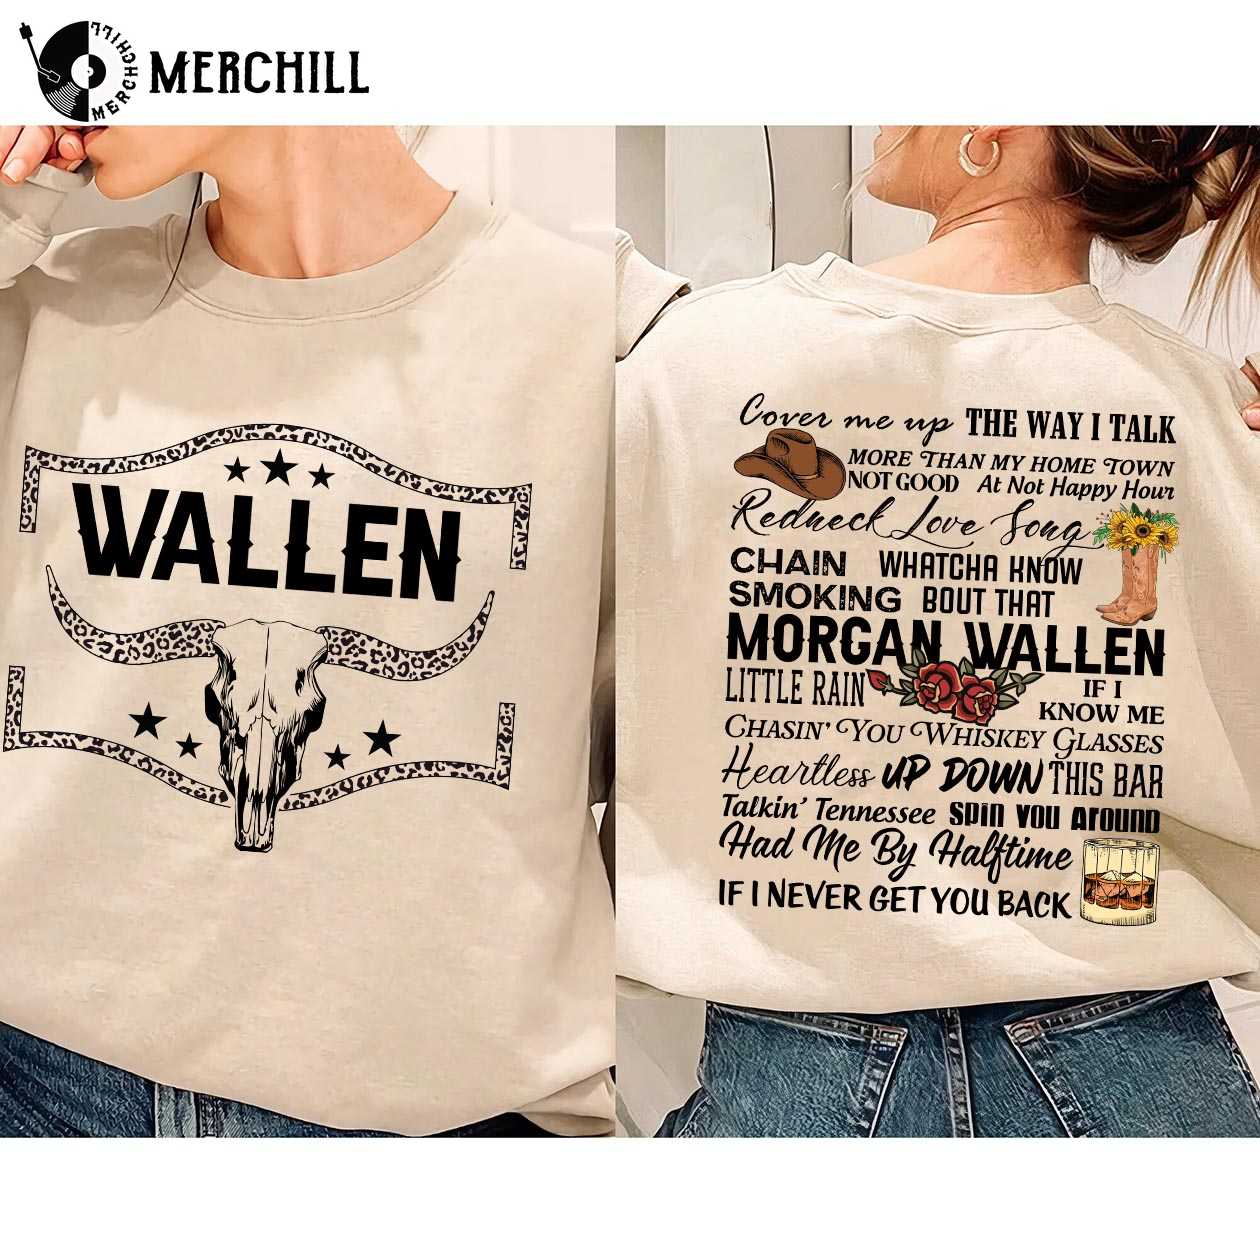 Morgan Wallen Cover Me Up American Singer T Shirt by